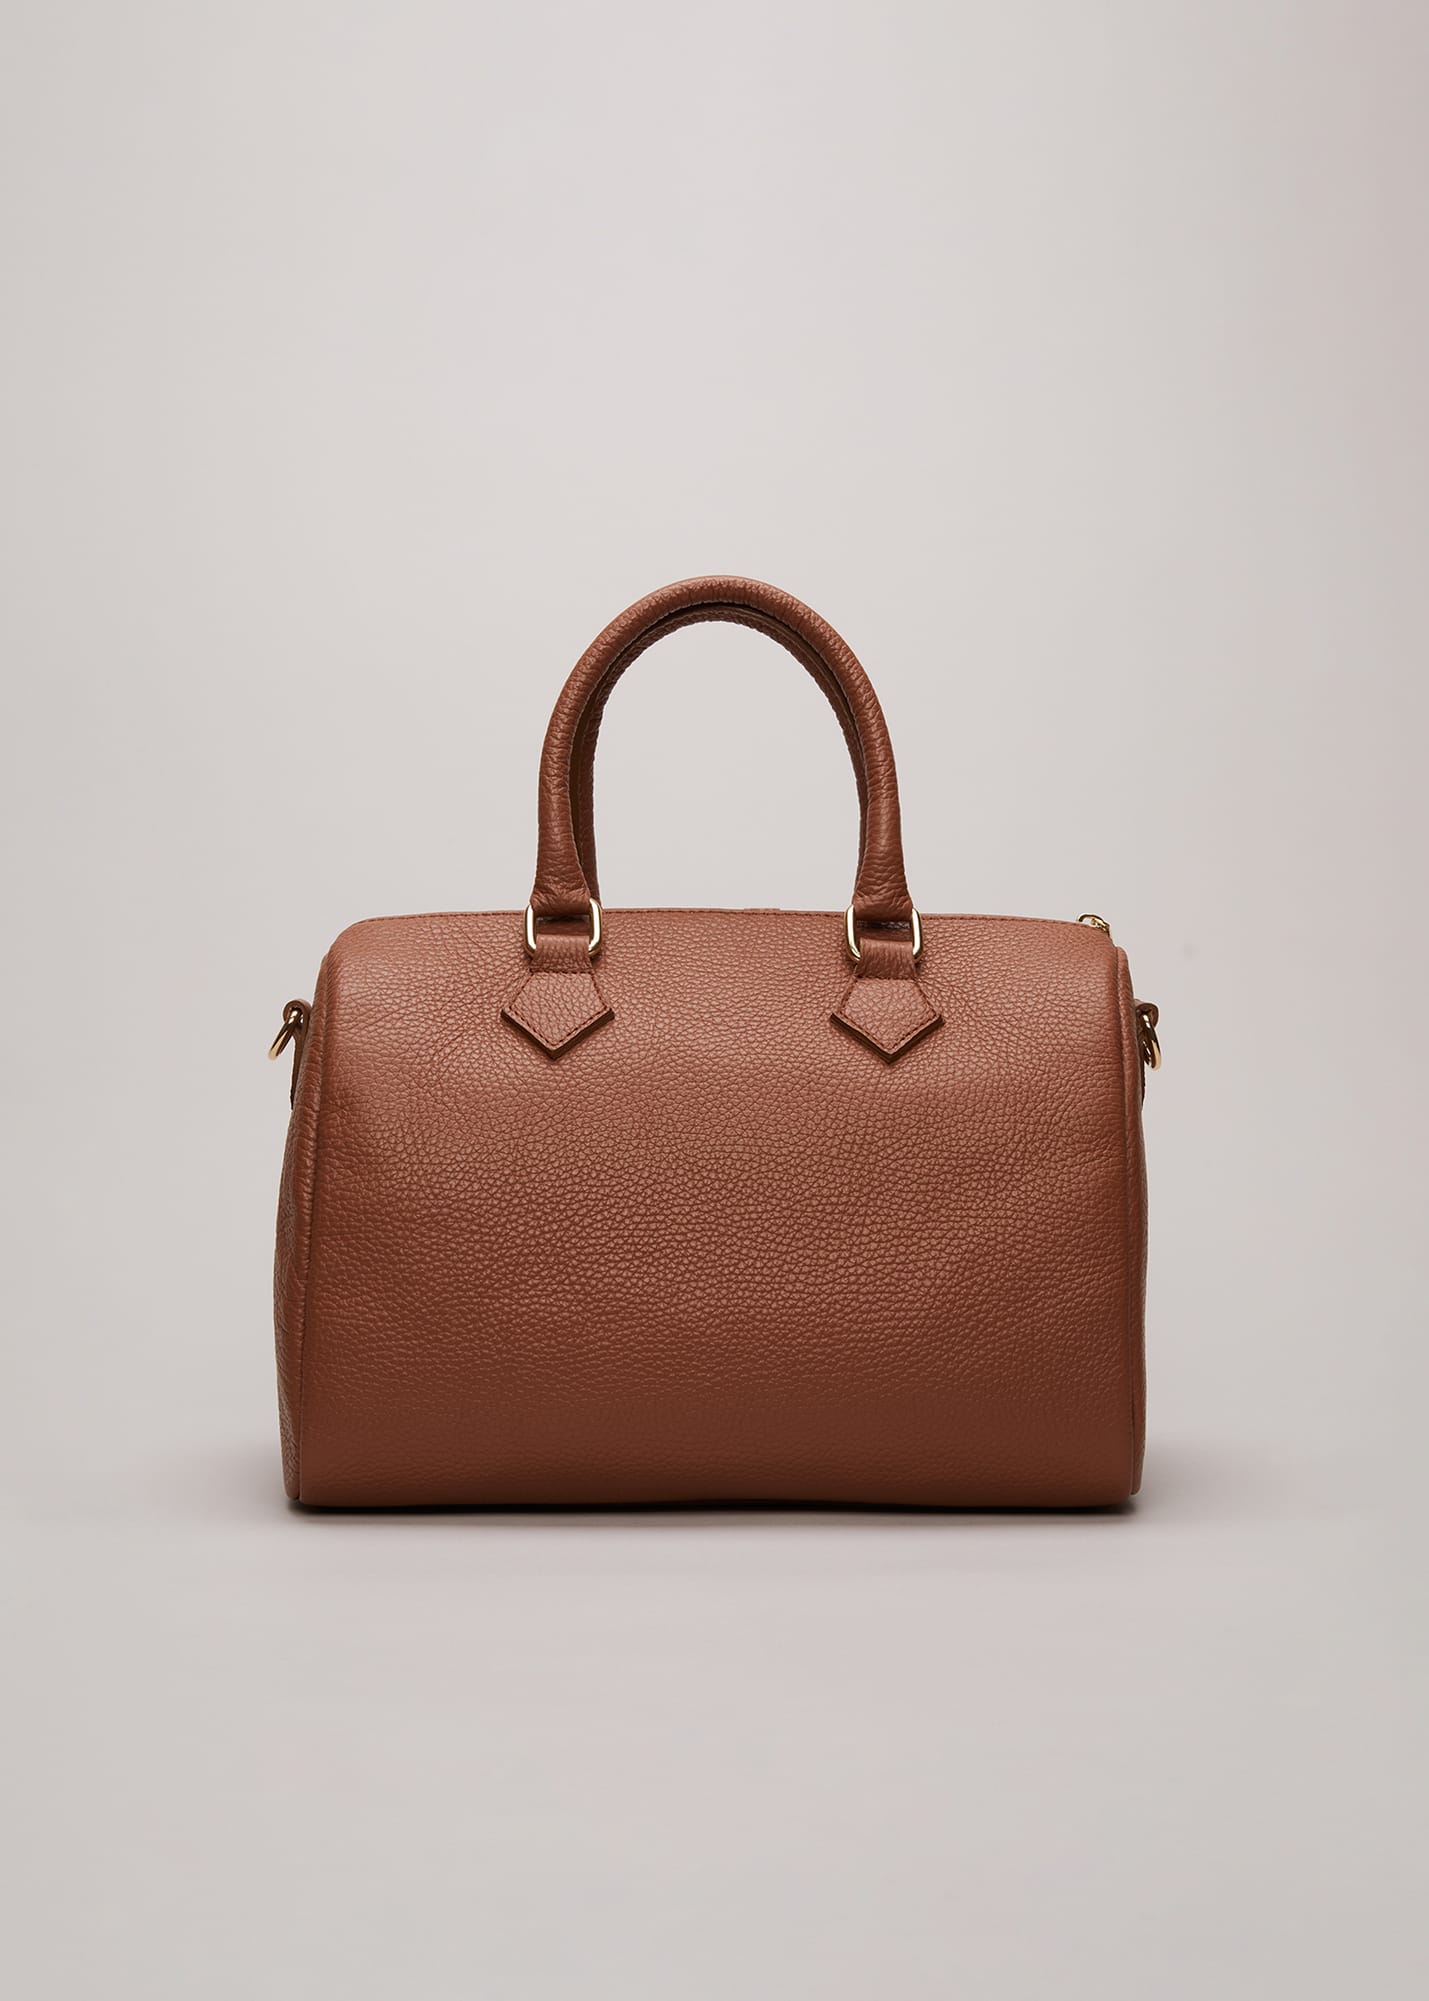 Phase Eight Women's Brown Leather Bowling Bag